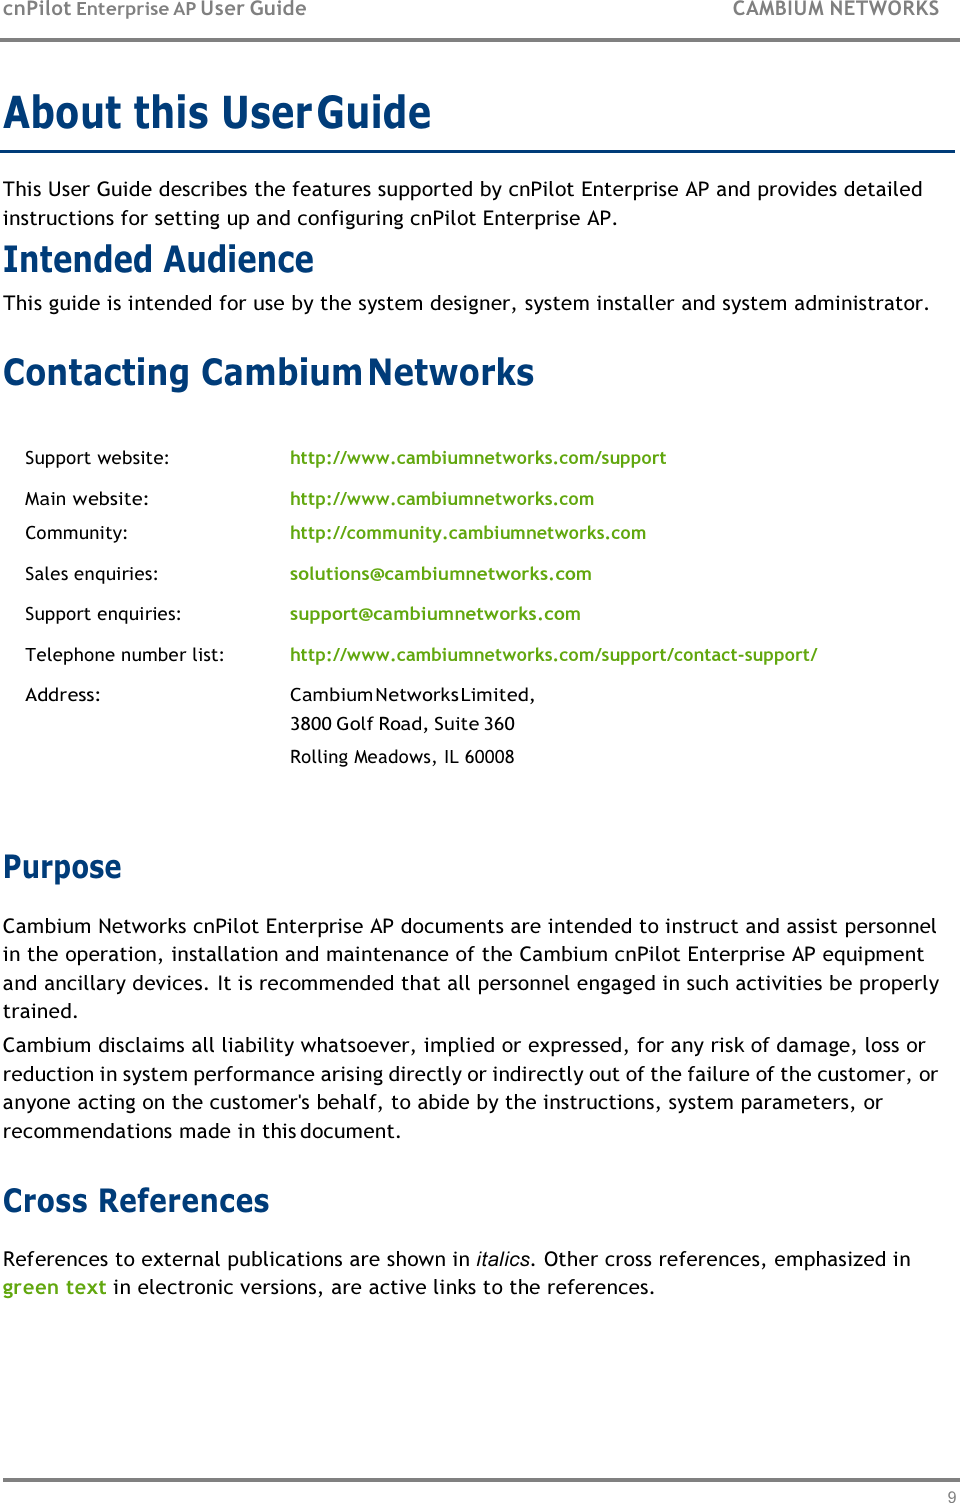 9   cnPilot Enterprise AP User Guide  CAMBIUM NETWORKS About this User Guide  This User Guide describes the features supported by cnPilot Enterprise AP and provides detailed instructions for setting up and configuring cnPilot Enterprise AP. Intended Audience This guide is intended for use by the system designer, system installer and system administrator.  Contacting Cambium Networks   Support website: http://www.cambiumnetworks.com/support Main website: Community: http://www.cambiumnetworks.com http://community.cambiumnetworks.com Sales enquiries: solutions@cambiumnetworks.com Support enquiries: support@cambiumnetworks.com Telephone number list: http://www.cambiumnetworks.com/support/contact-support/ Address: Cambium Networks Limited, 3800 Golf Road, Suite 360 Rolling Meadows, IL 60008   Purpose Cambium Networks cnPilot Enterprise AP documents are intended to instruct and assist personnel in the operation, installation and maintenance of the Cambium cnPilot Enterprise AP equipment and ancillary devices. It is recommended that all personnel engaged in such activities be properly trained. Cambium disclaims all liability whatsoever, implied or expressed, for any risk of damage, loss or reduction in system performance arising directly or indirectly out of the failure of the customer, or anyone acting on the customer&apos;s behalf, to abide by the instructions, system parameters, or recommendations made in this document.  Cross References References to external publications are shown in italics. Other cross references, emphasized in green text in electronic versions, are active links to the references. 